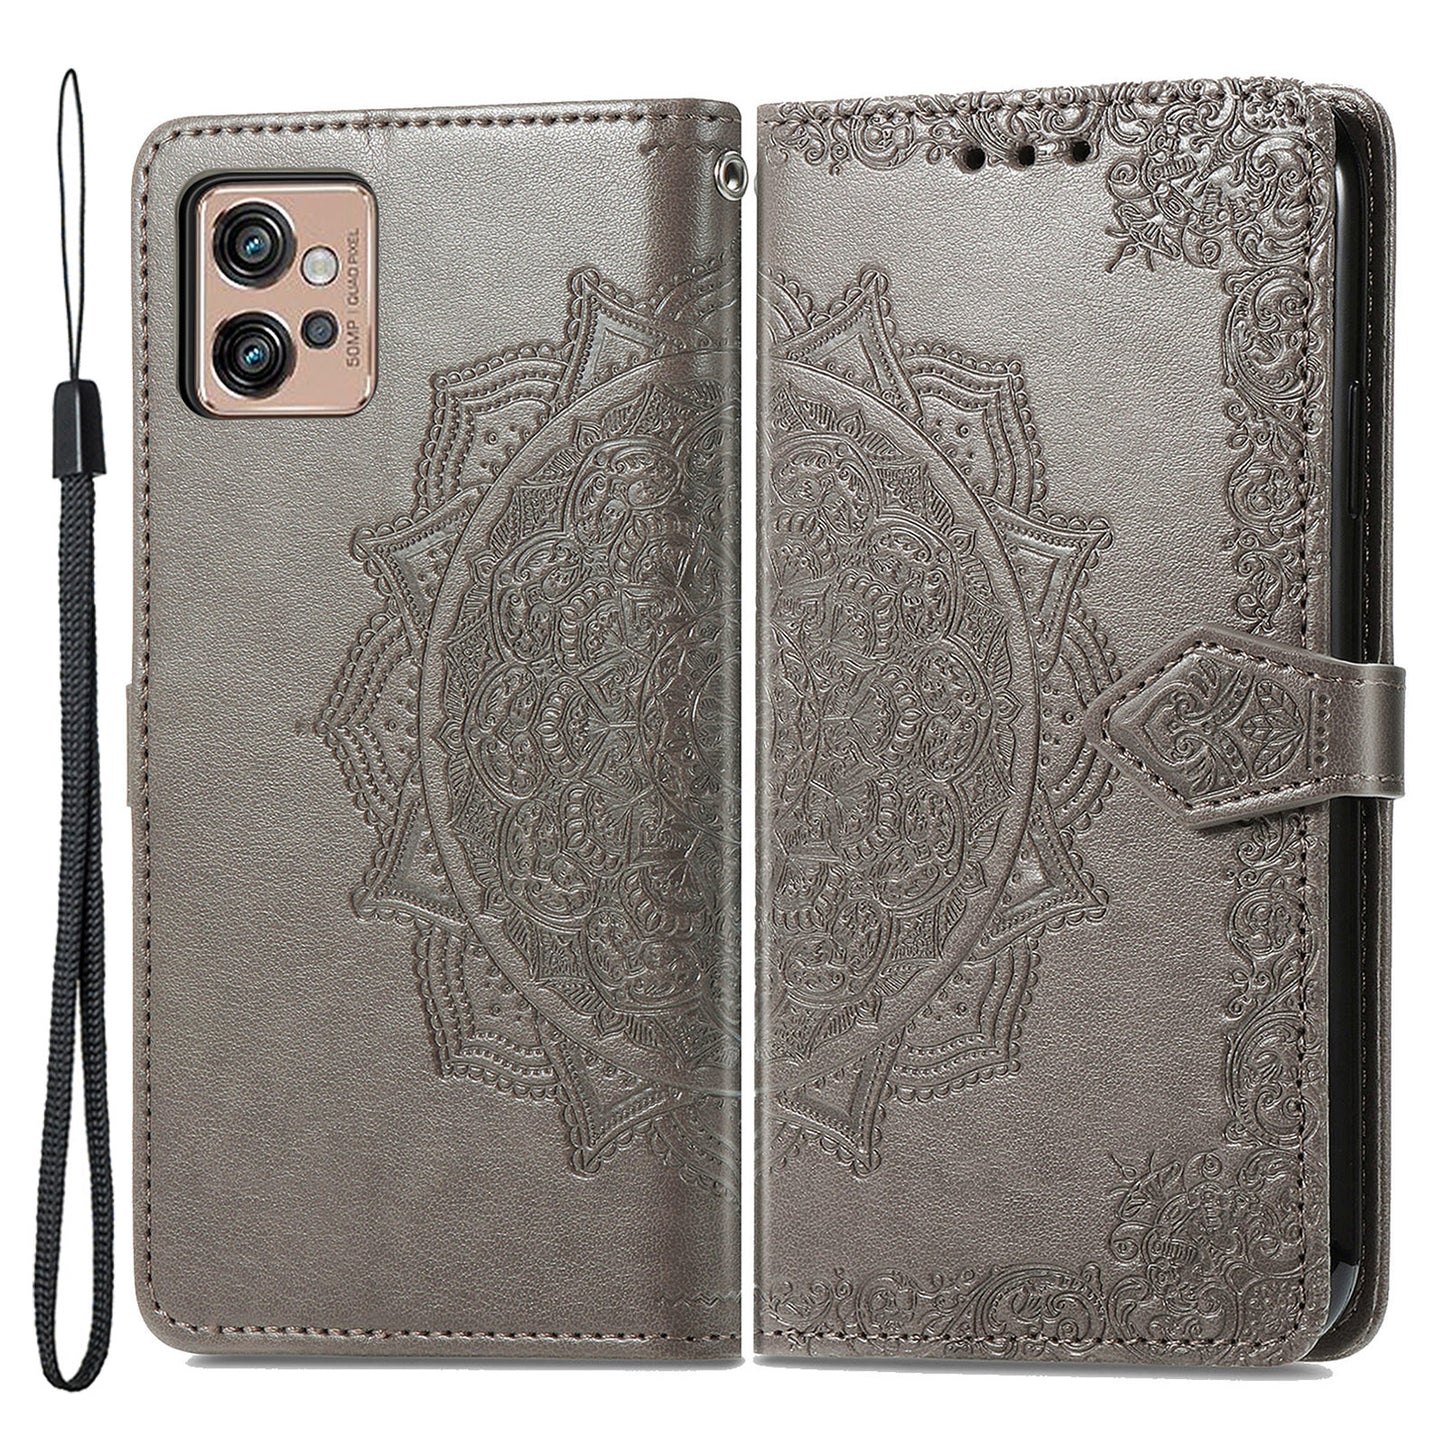 For Motorola Moto G32 4G Embossed Mandala Pattern PU Leather Flip Phone Case Wallet Stand Function Phone Shell Protector